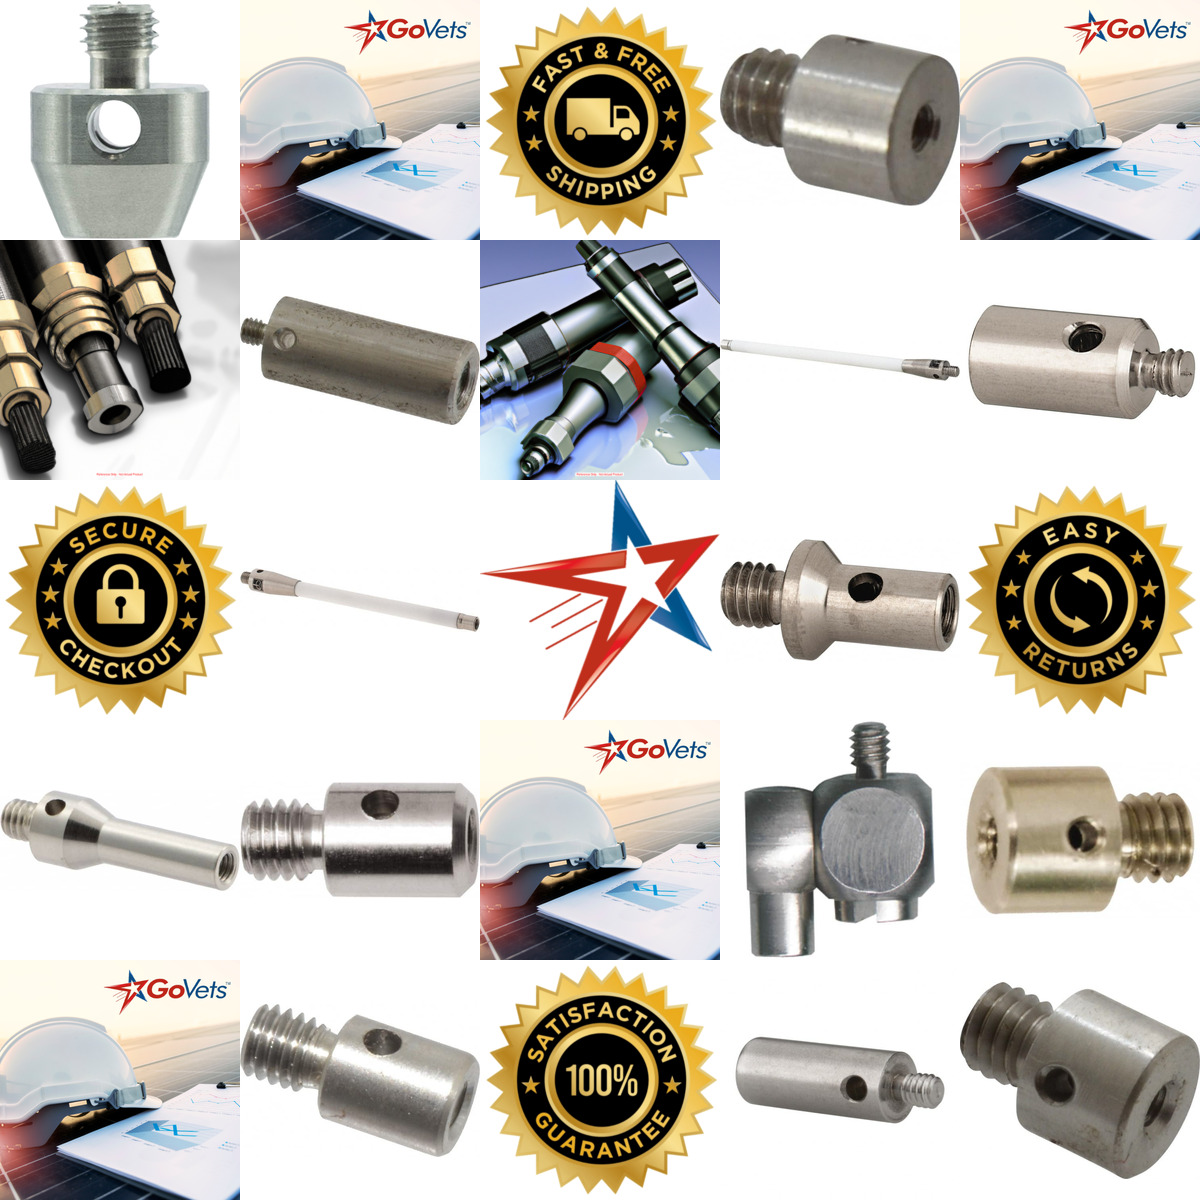 A selection of Cmm Stylus Adapters products on GoVets